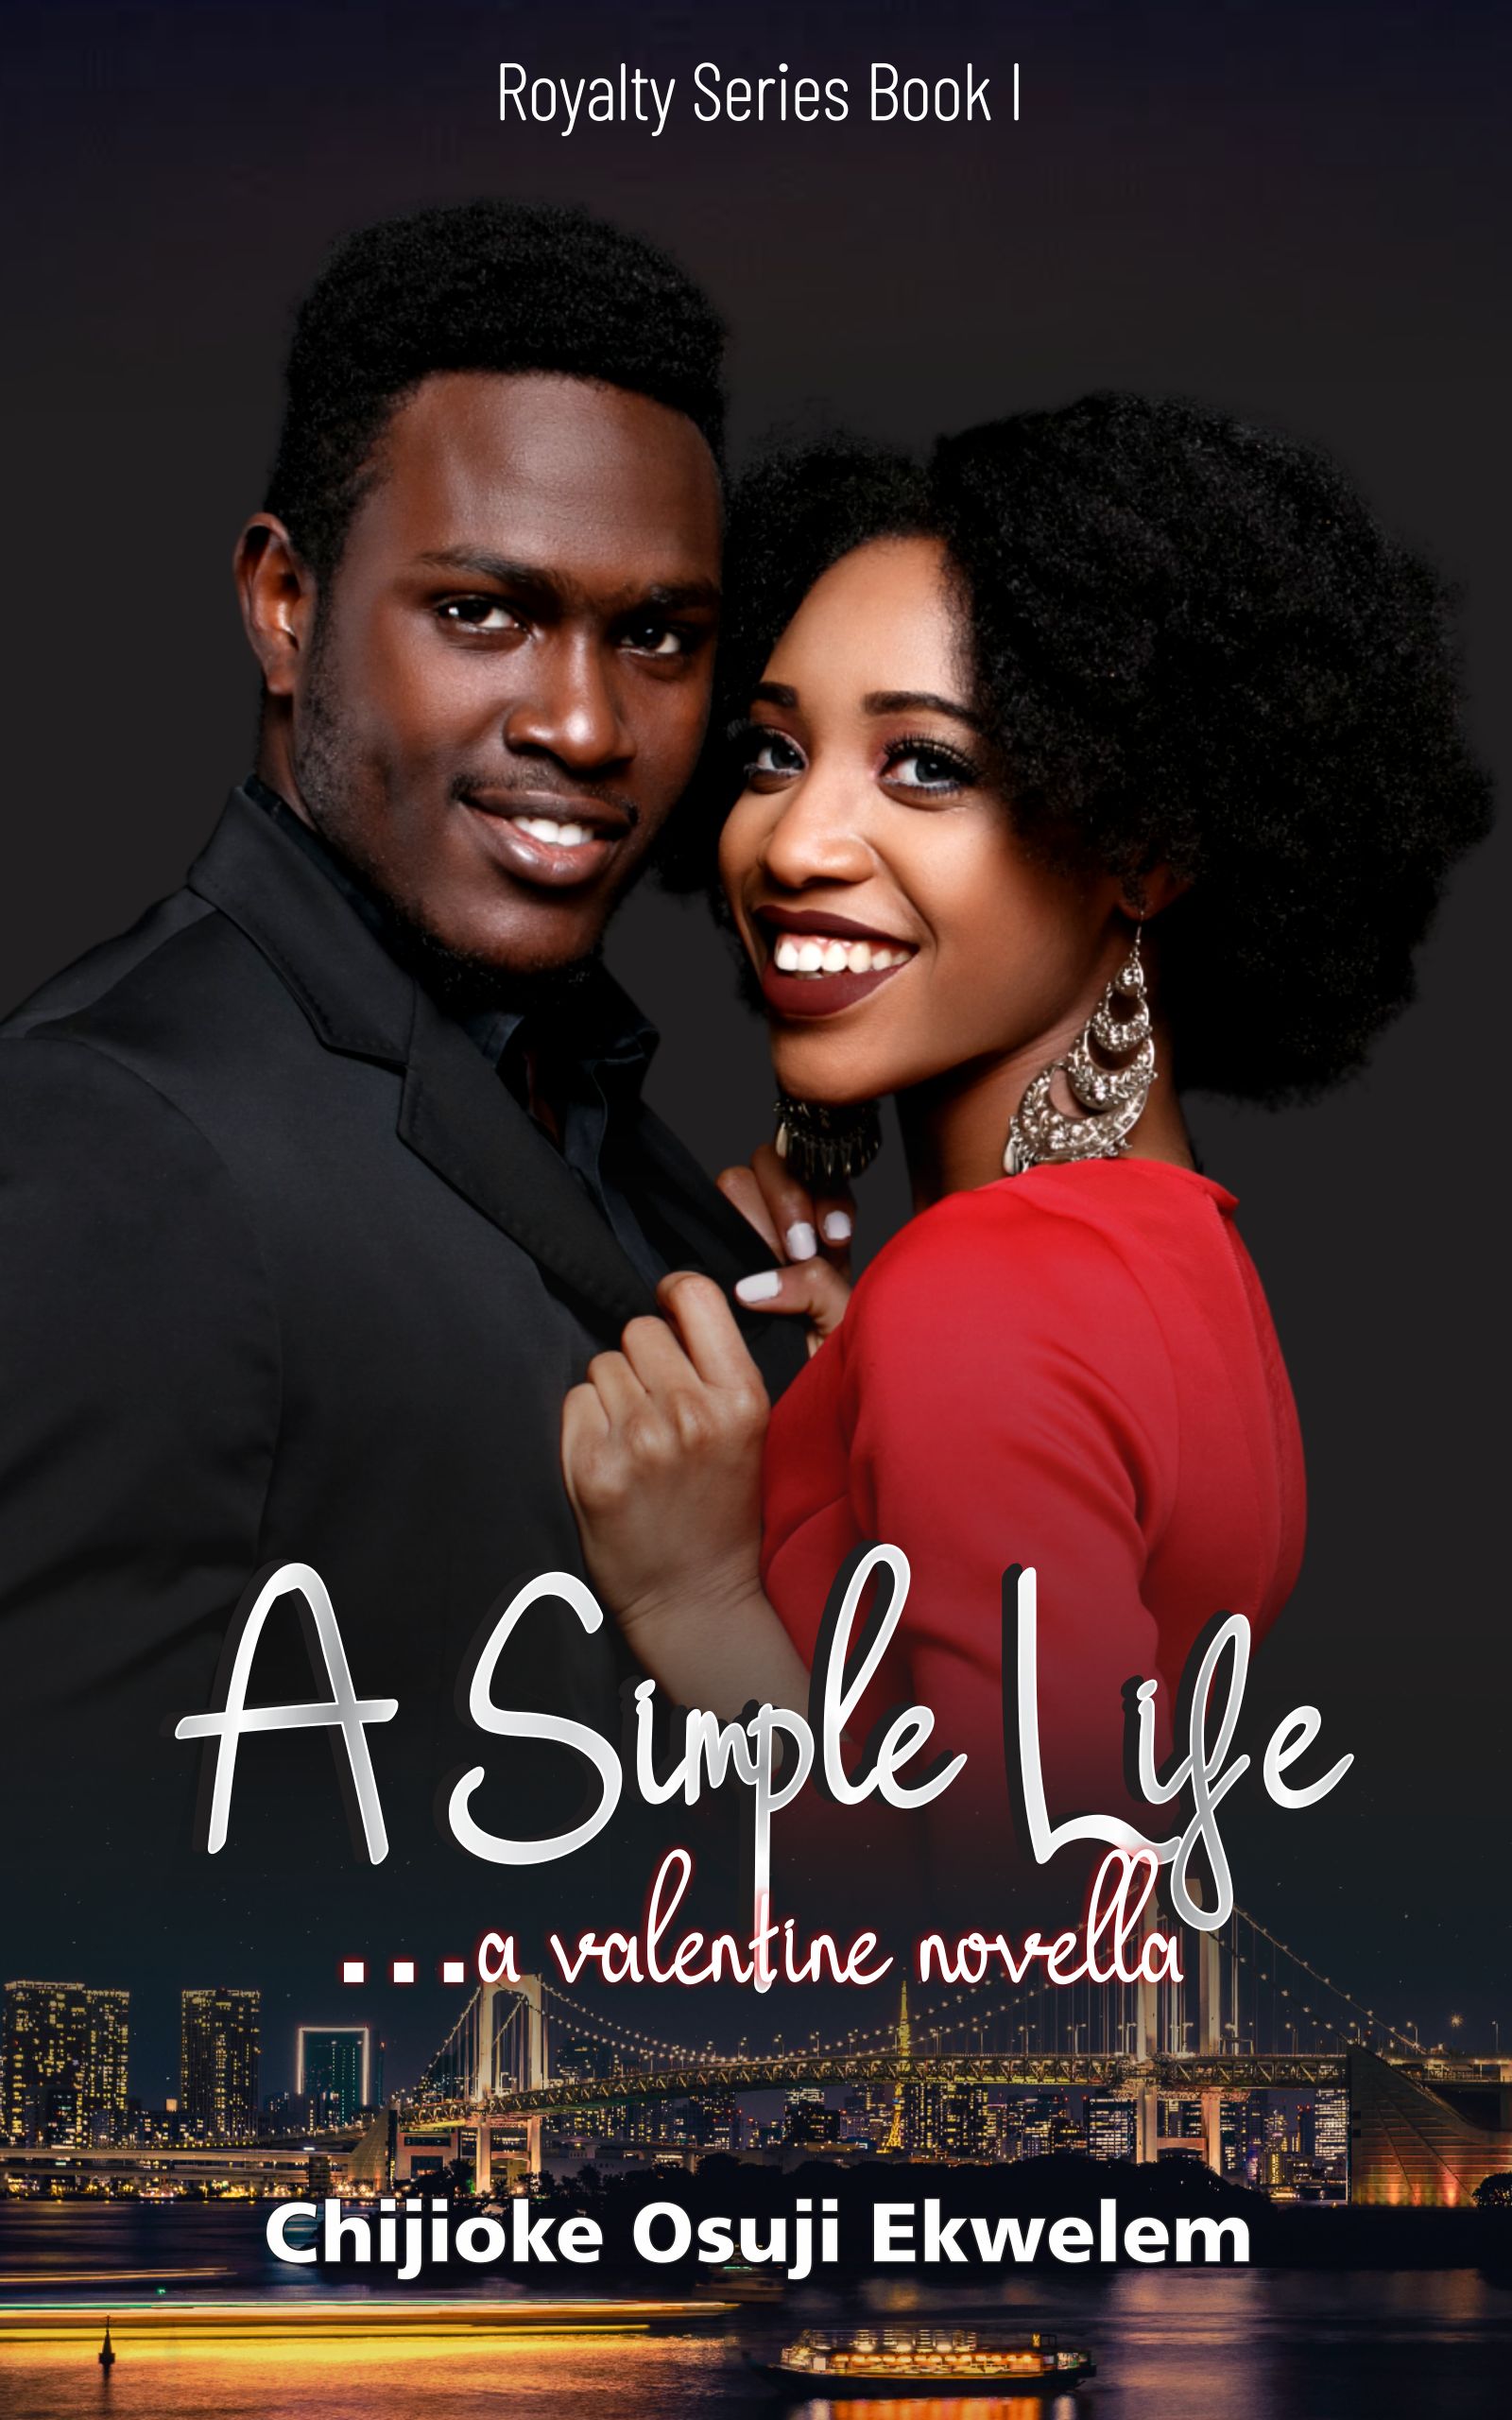 A-Simple-Life-(Royalty-Series-Book-I)